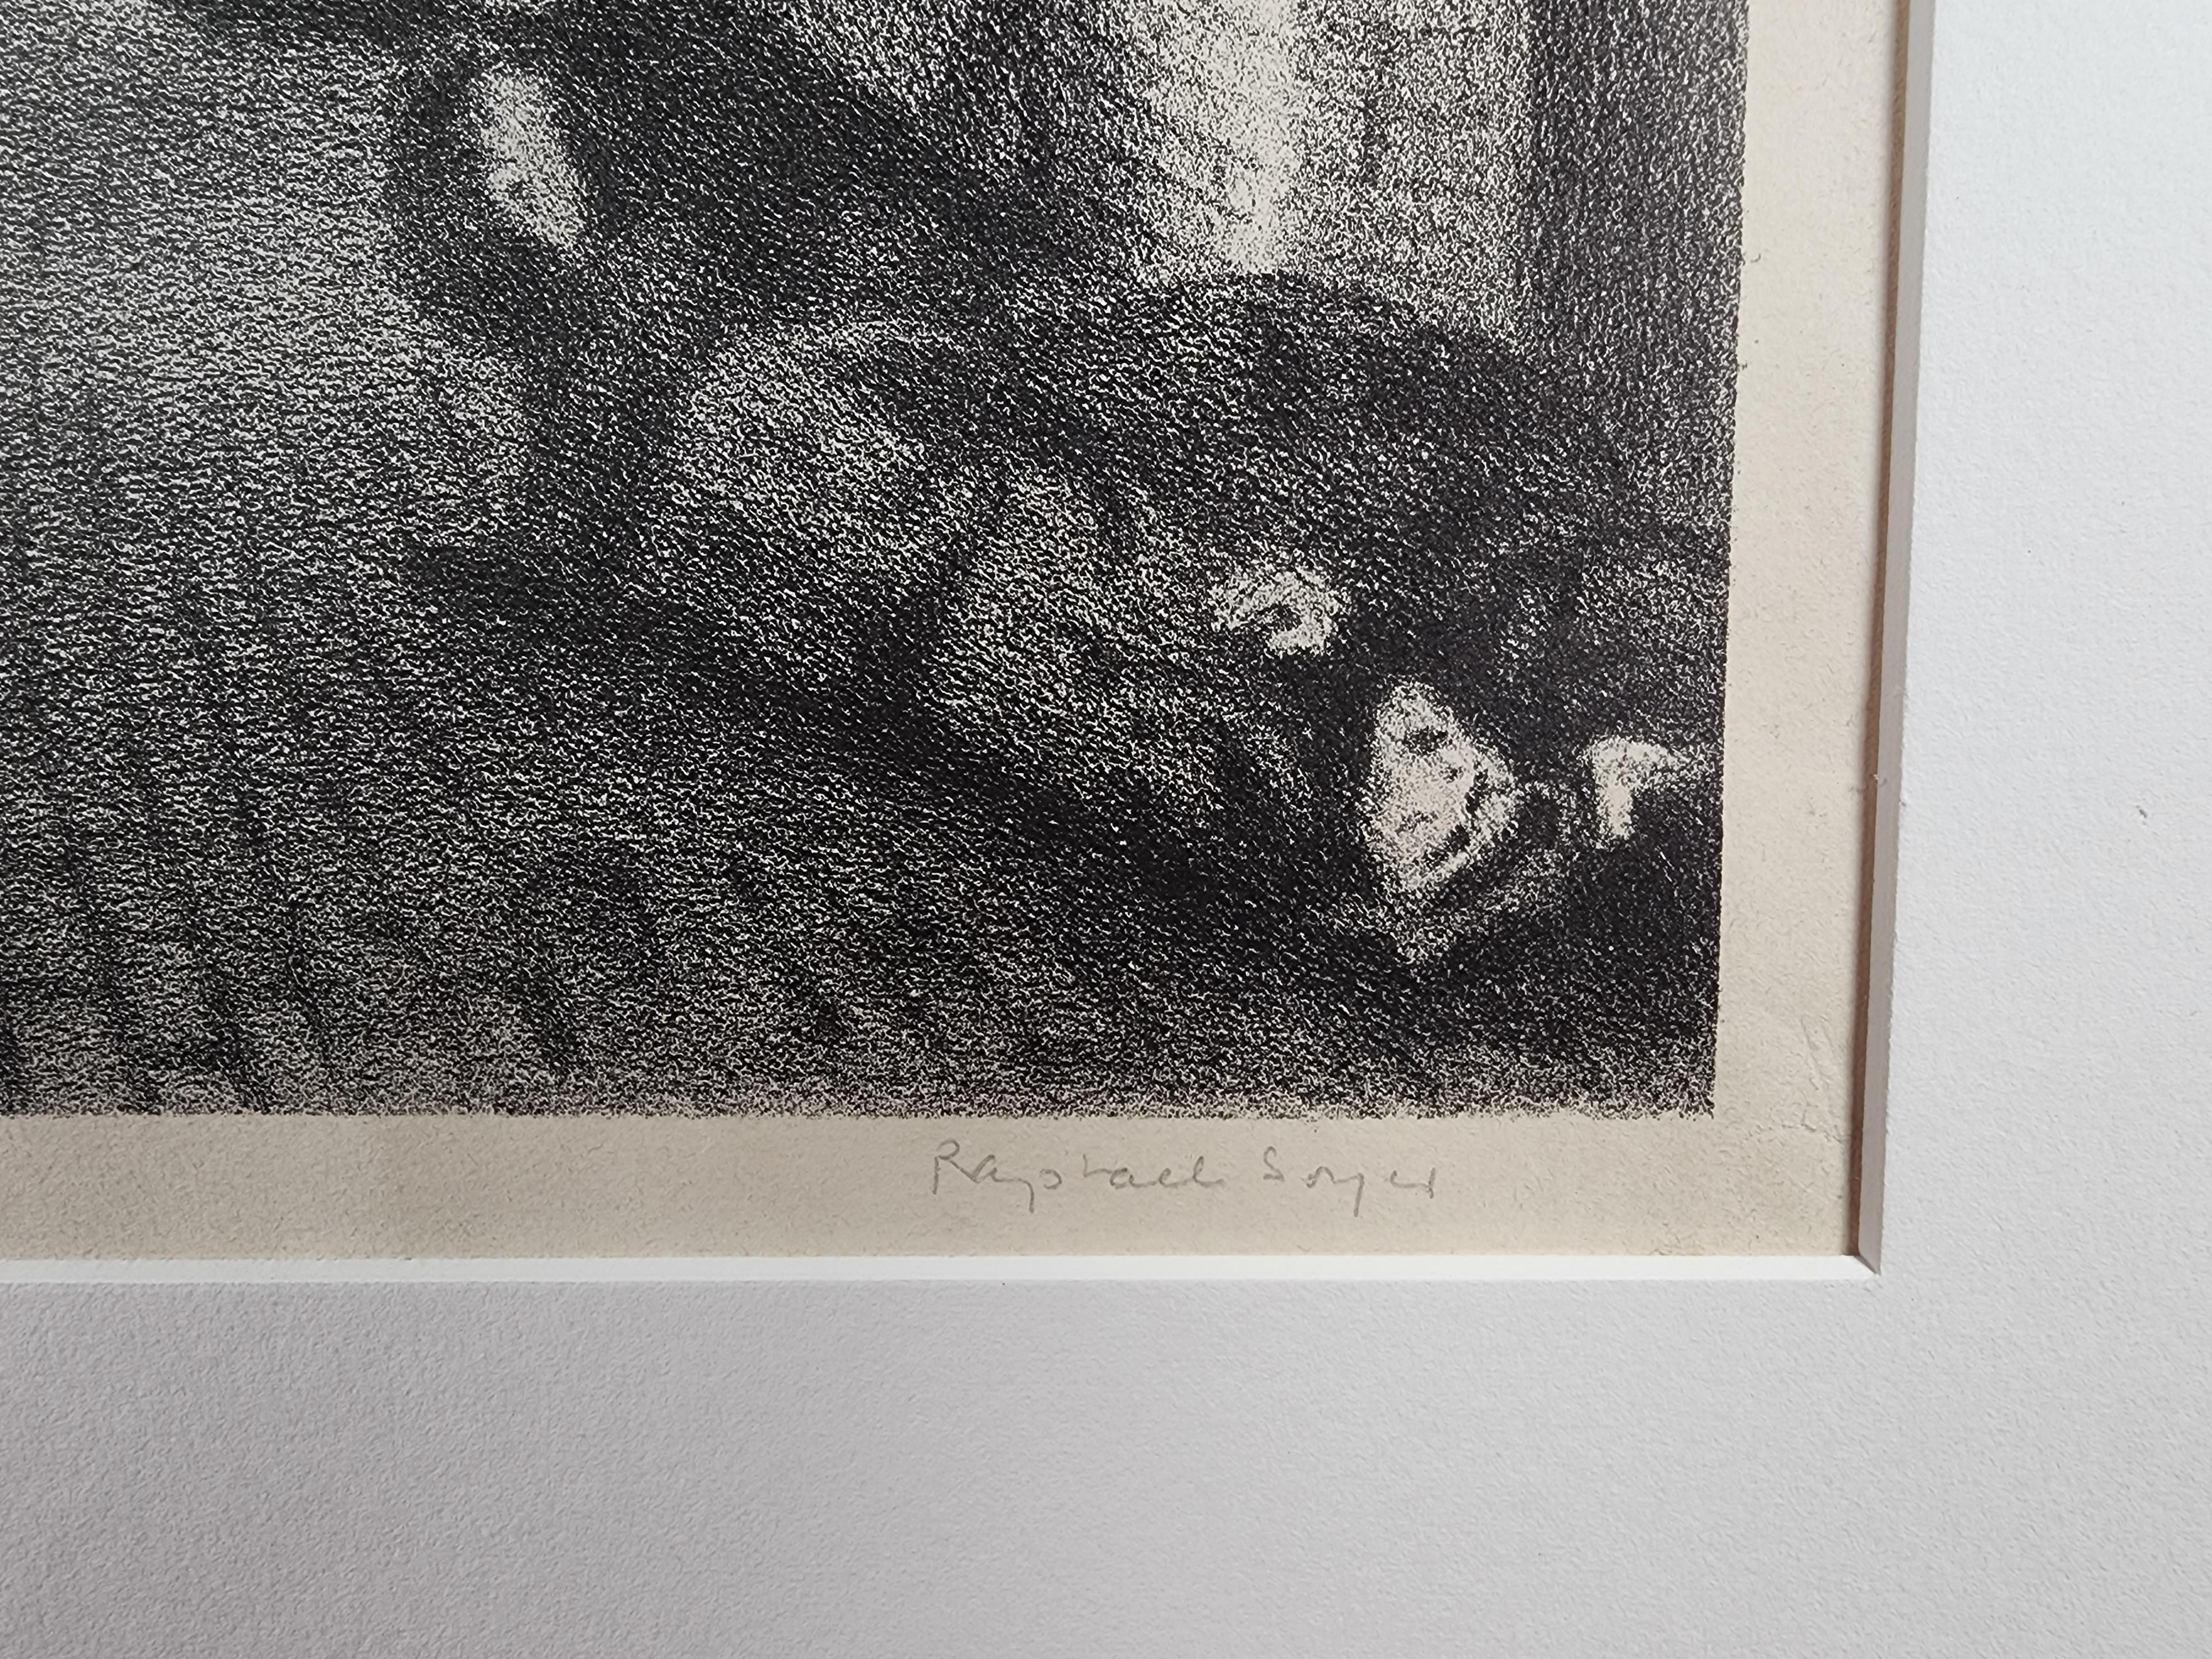 Waterfront - Print by Raphael Soyer